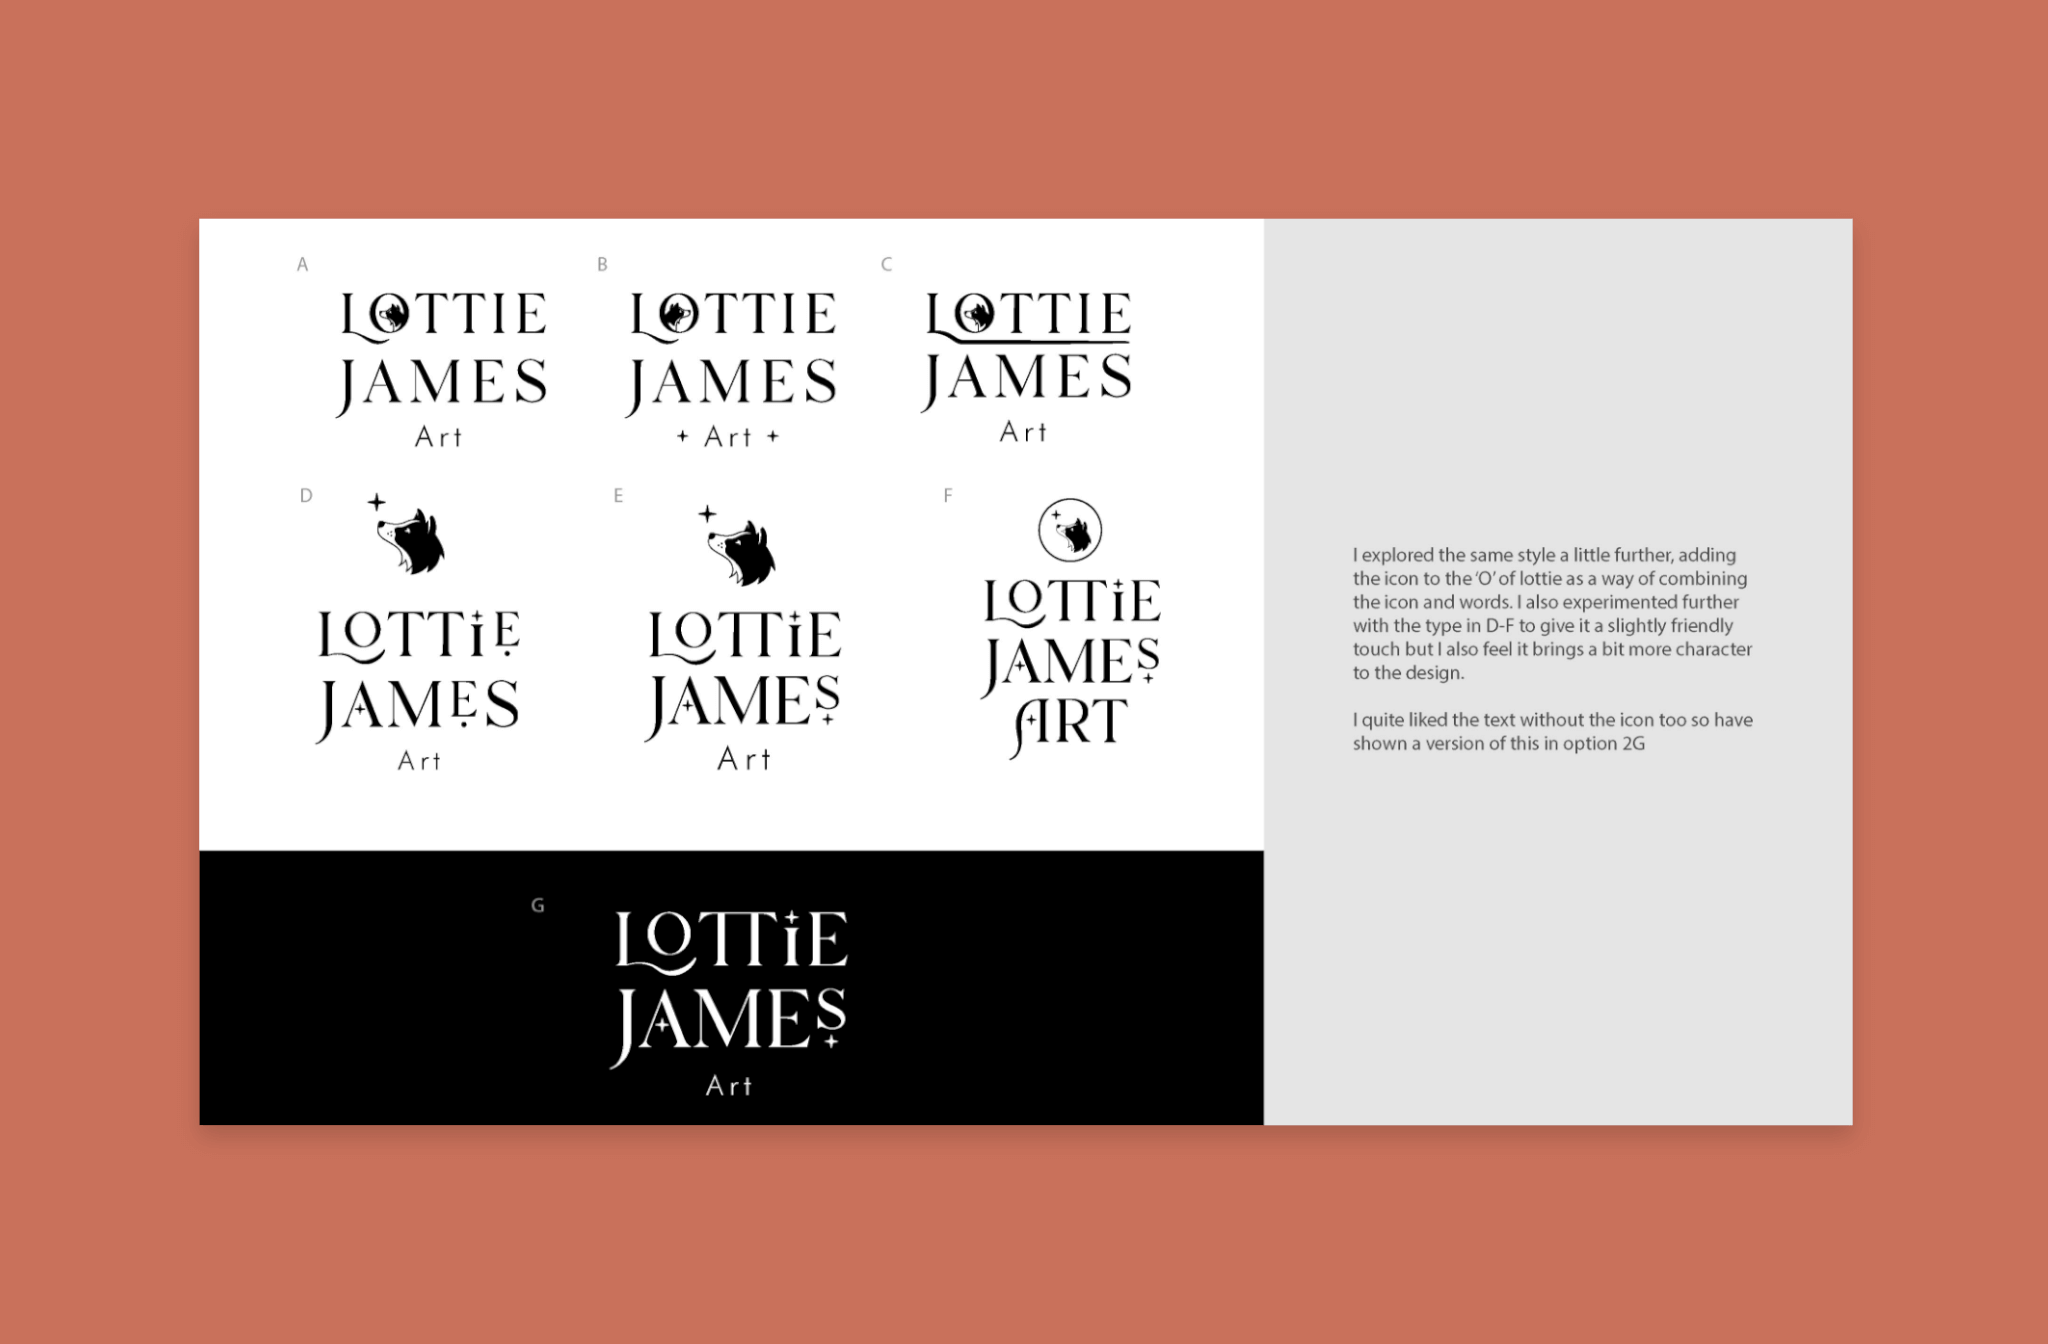 Logo concepts for the Lottie James Brand on a pink background